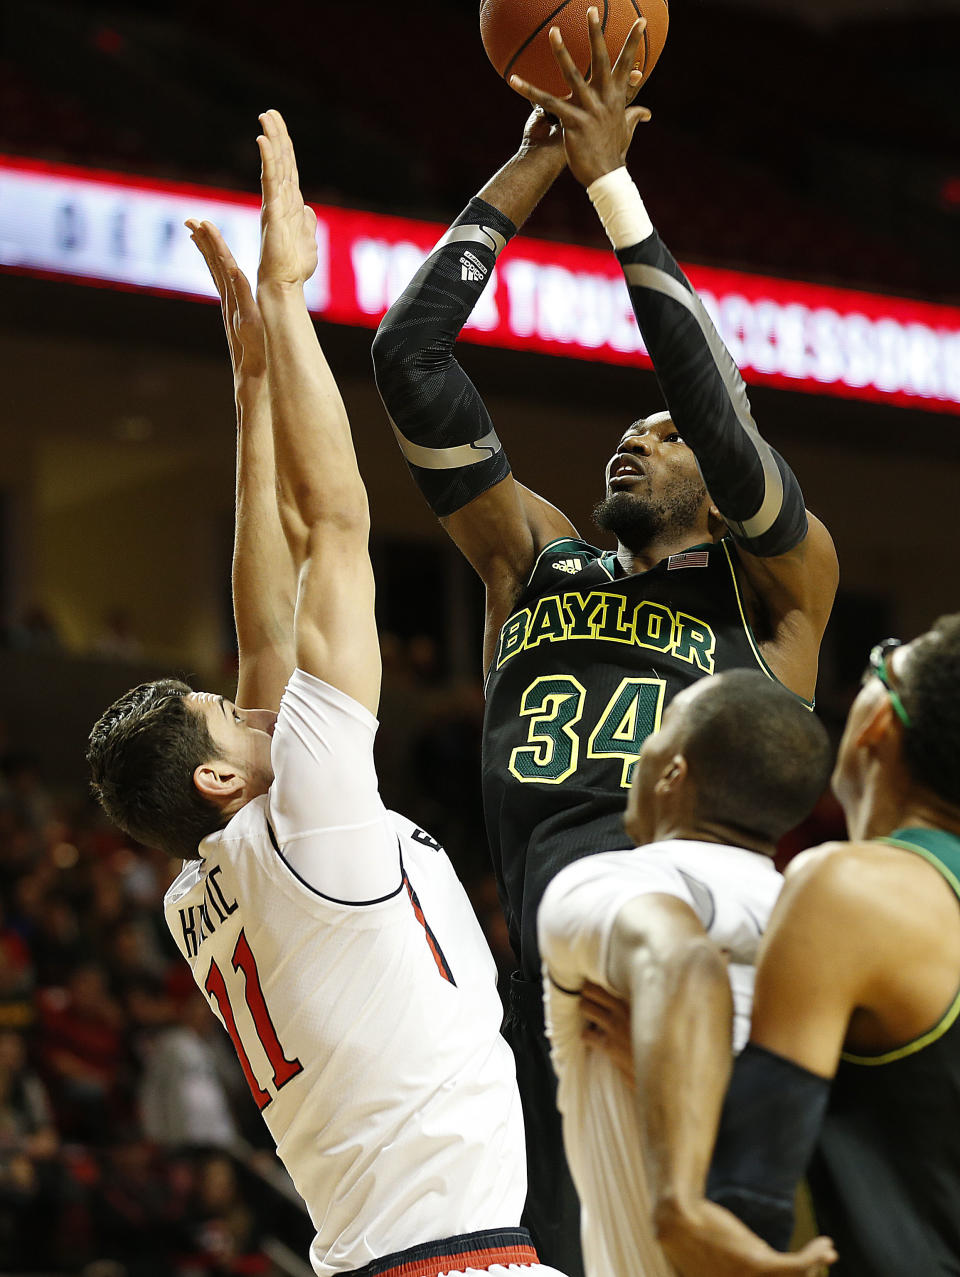 Baylor's Cory Jefferson shoots over Texas Tech's Dejan Kravic (11) during an NCAA college basketball game in Lubbock, Texas, Wednesday, Jan, 15, 2014. (AP Photo/Lubbock Avalanche-Journal, Tori Eichberger) ALL LOCAL TV OUT